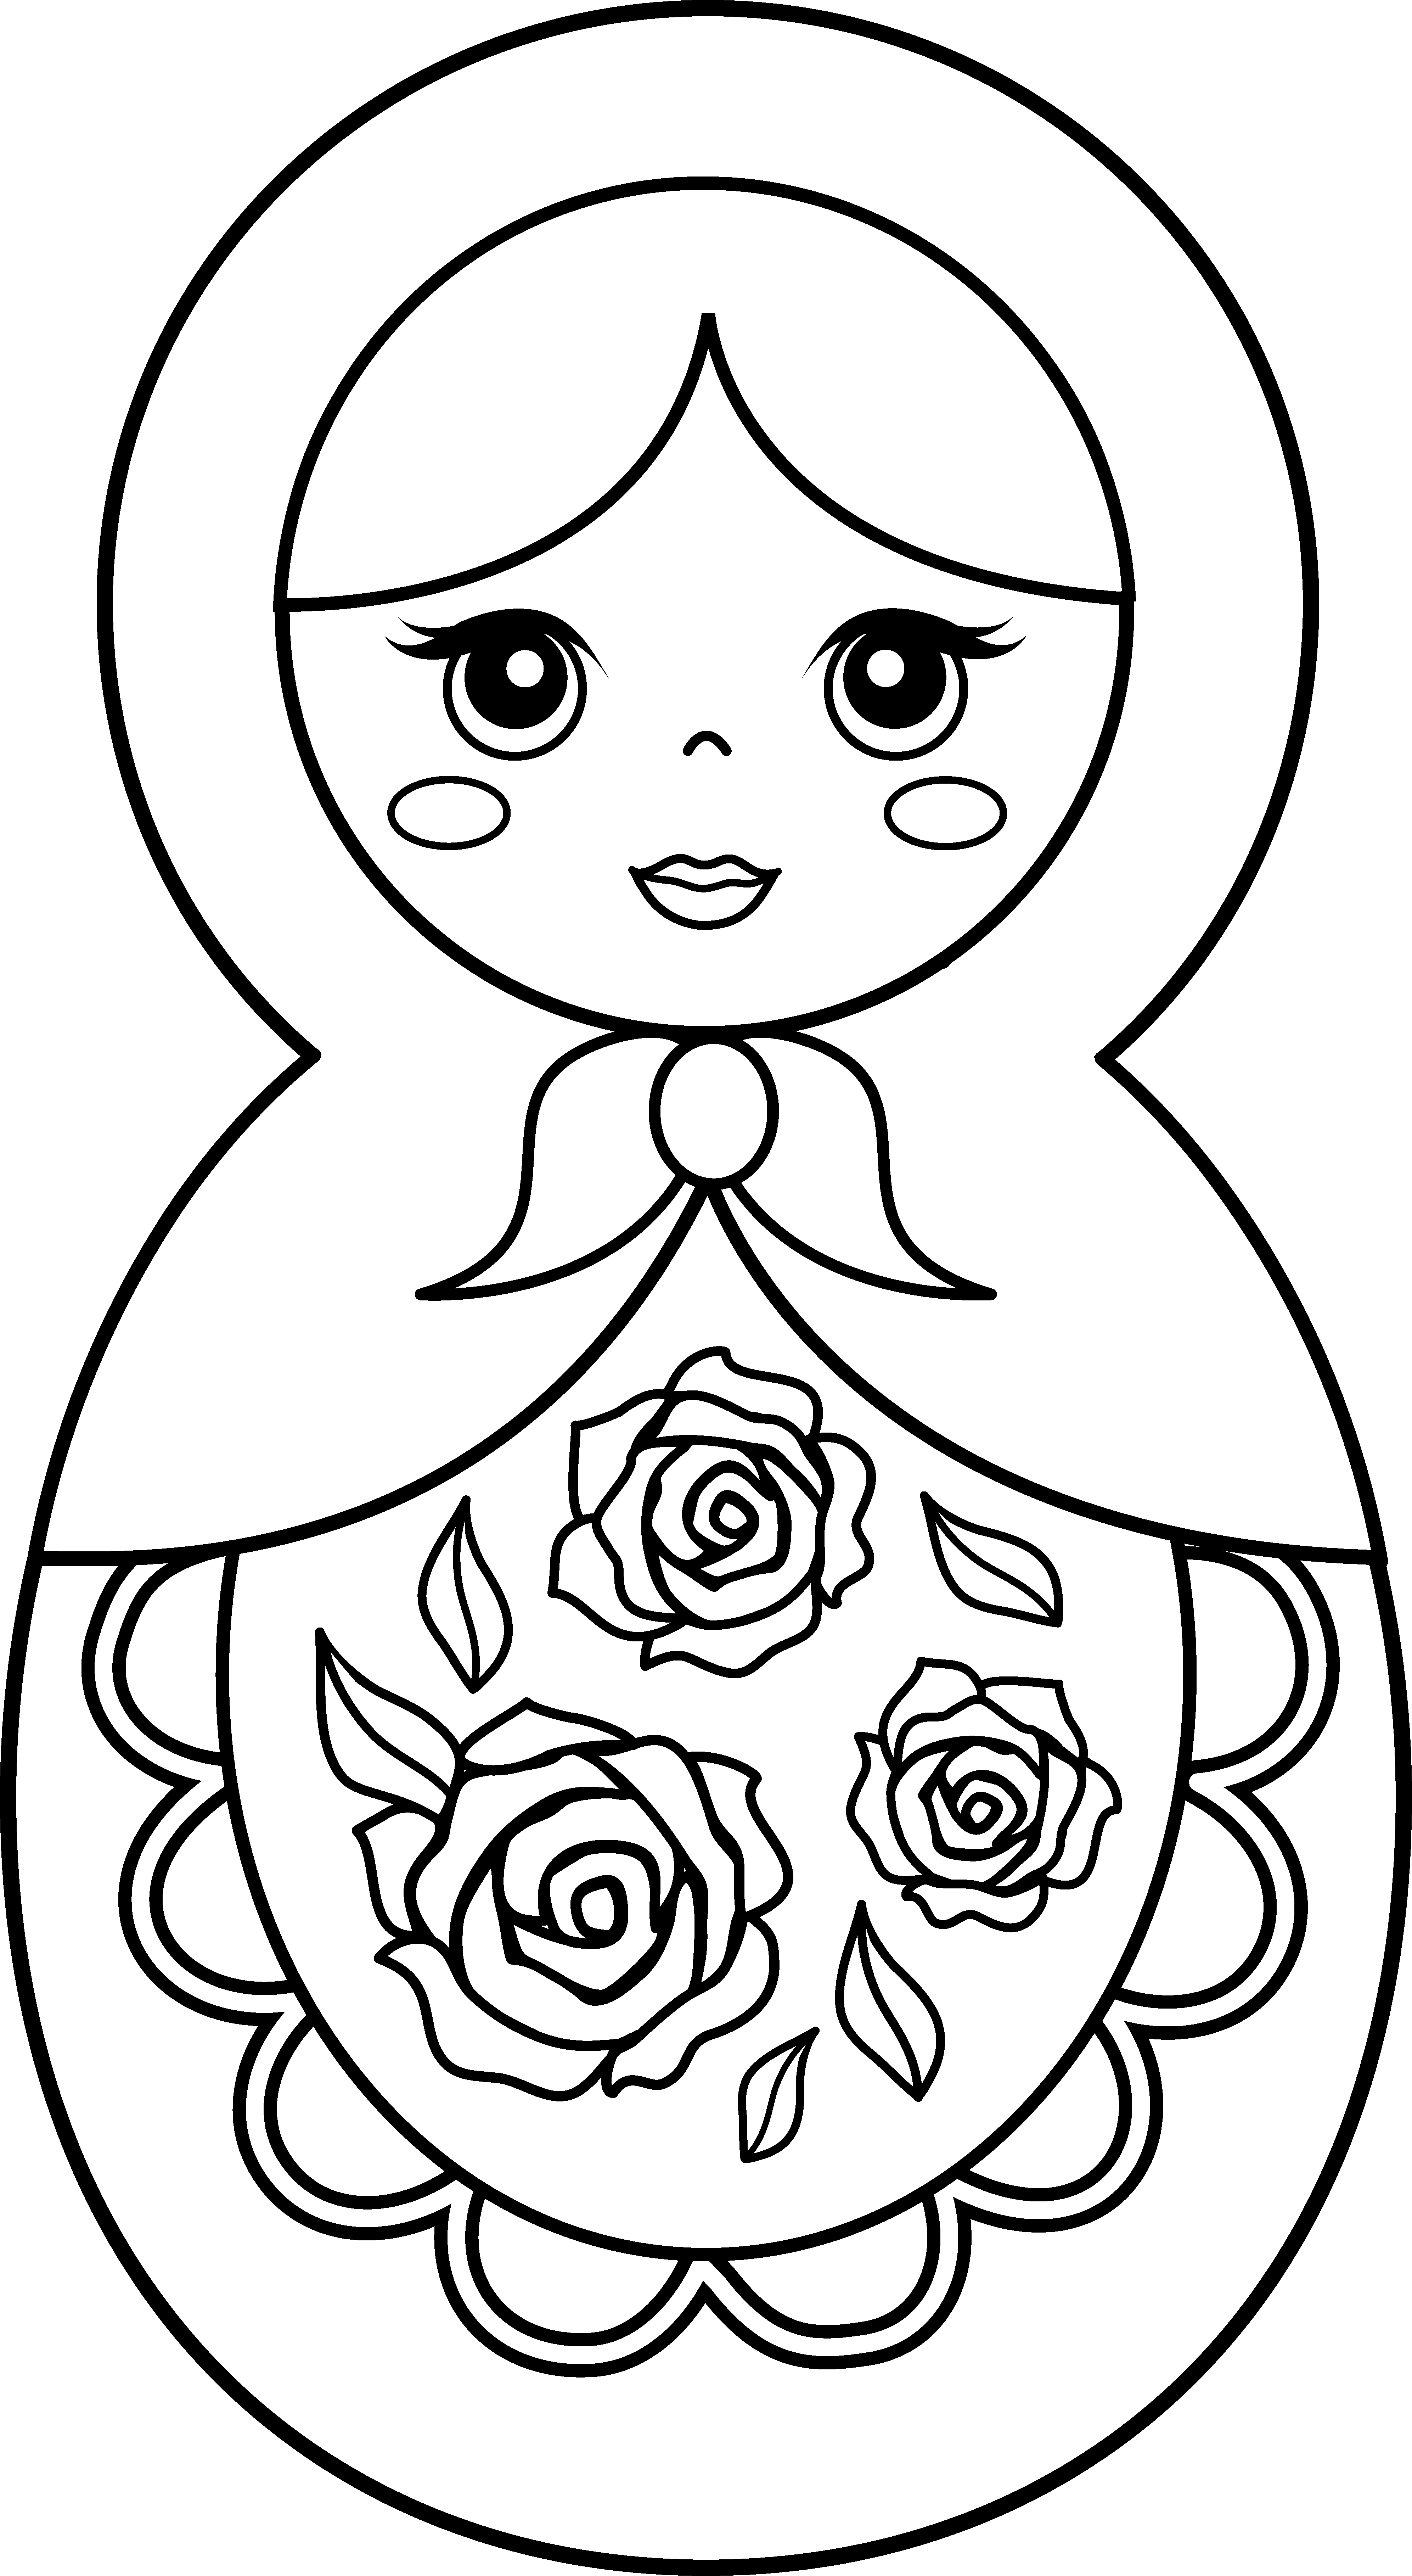 Flutes clipart coloring page. Matryoshka doll crafts pinterest